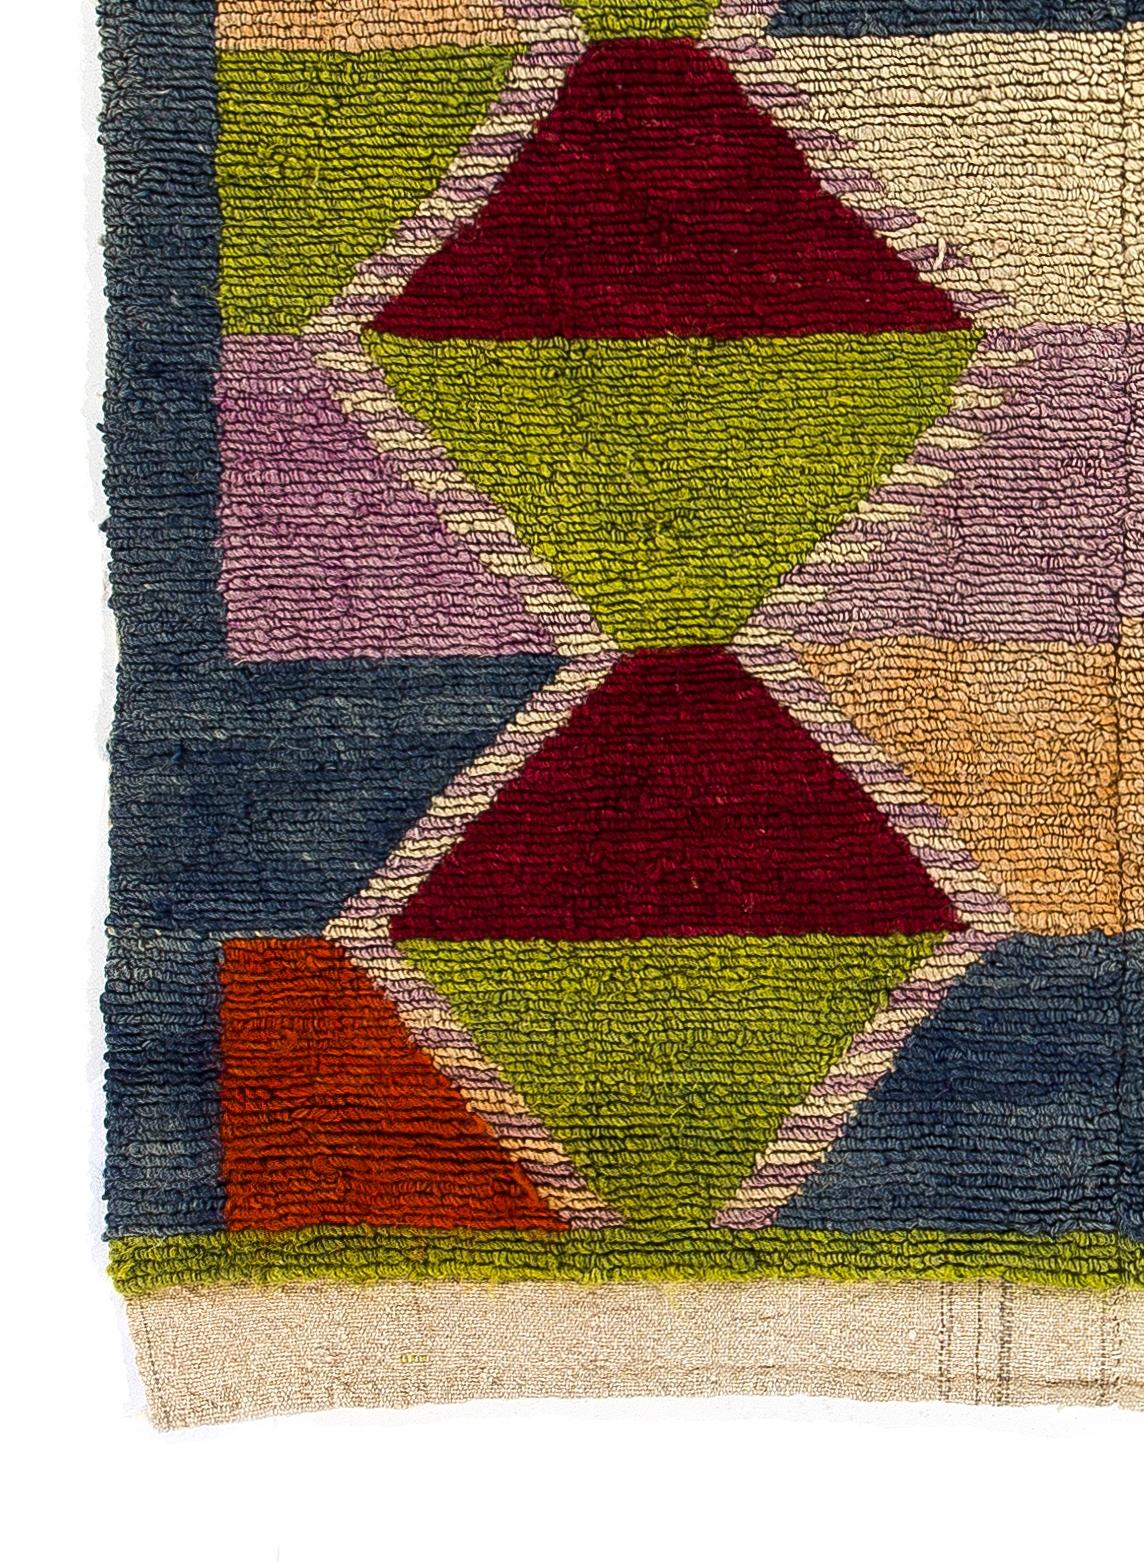 Hand-Knotted 3.7x4.6 Ft Colorful Unique Vintage Tulu Rug, Shaggy Wall Hanging, Decorative Art For Sale